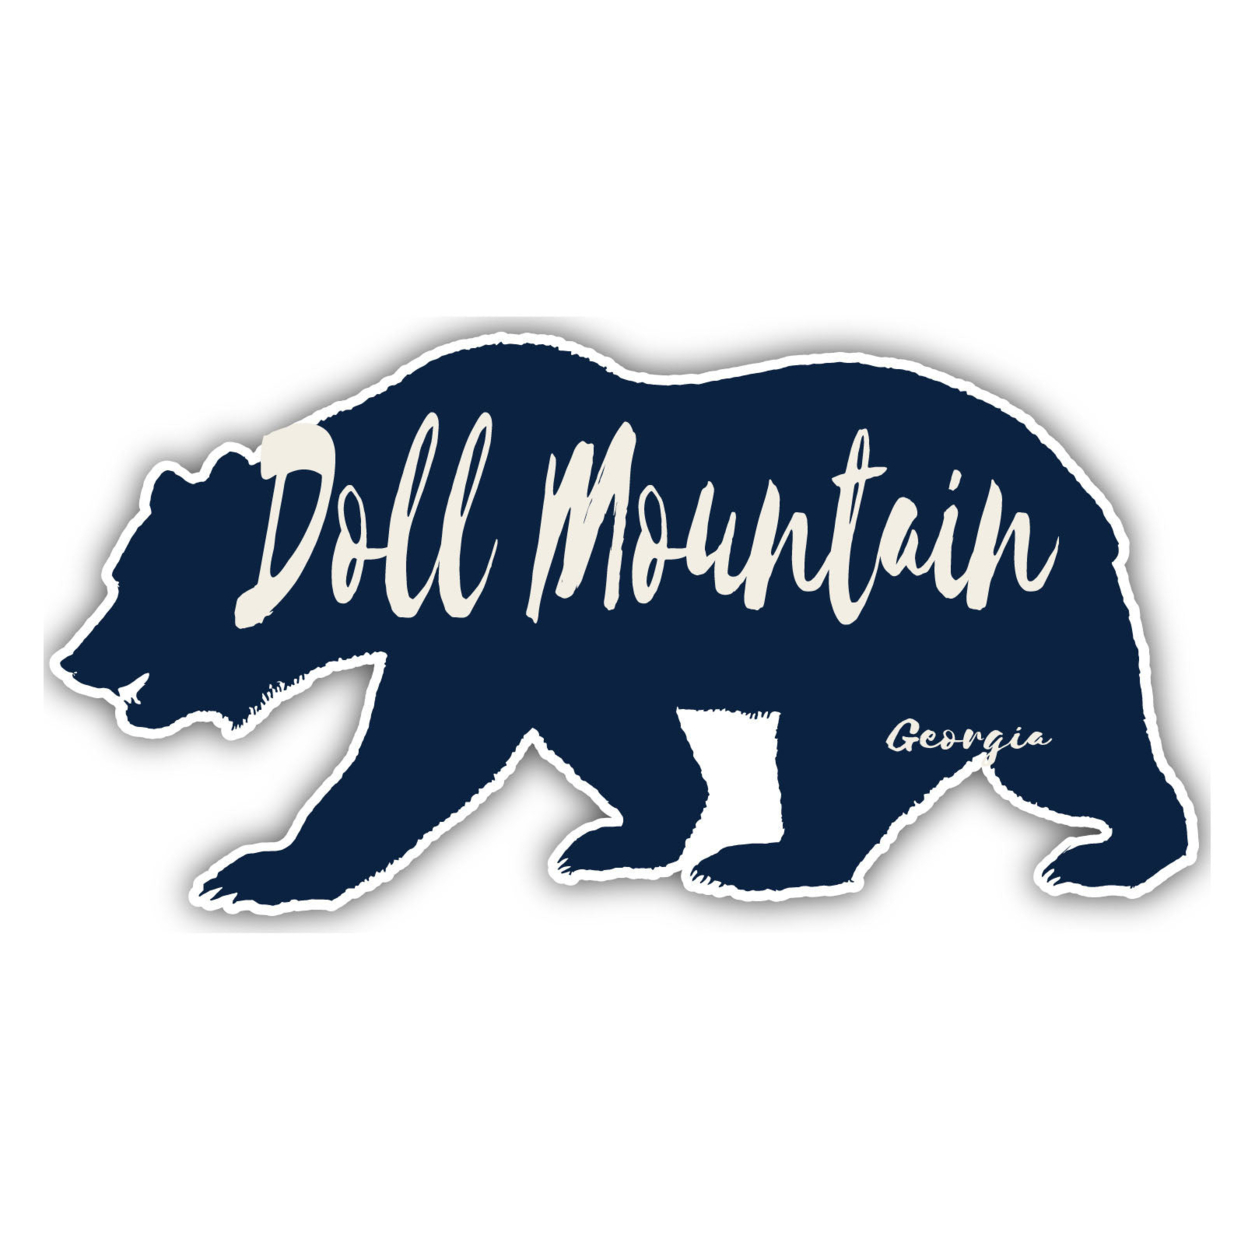 Doll Mountain Georgia Souvenir Decorative Stickers (Choose Theme And Size) - Single Unit, 10-Inch, Great Outdoors